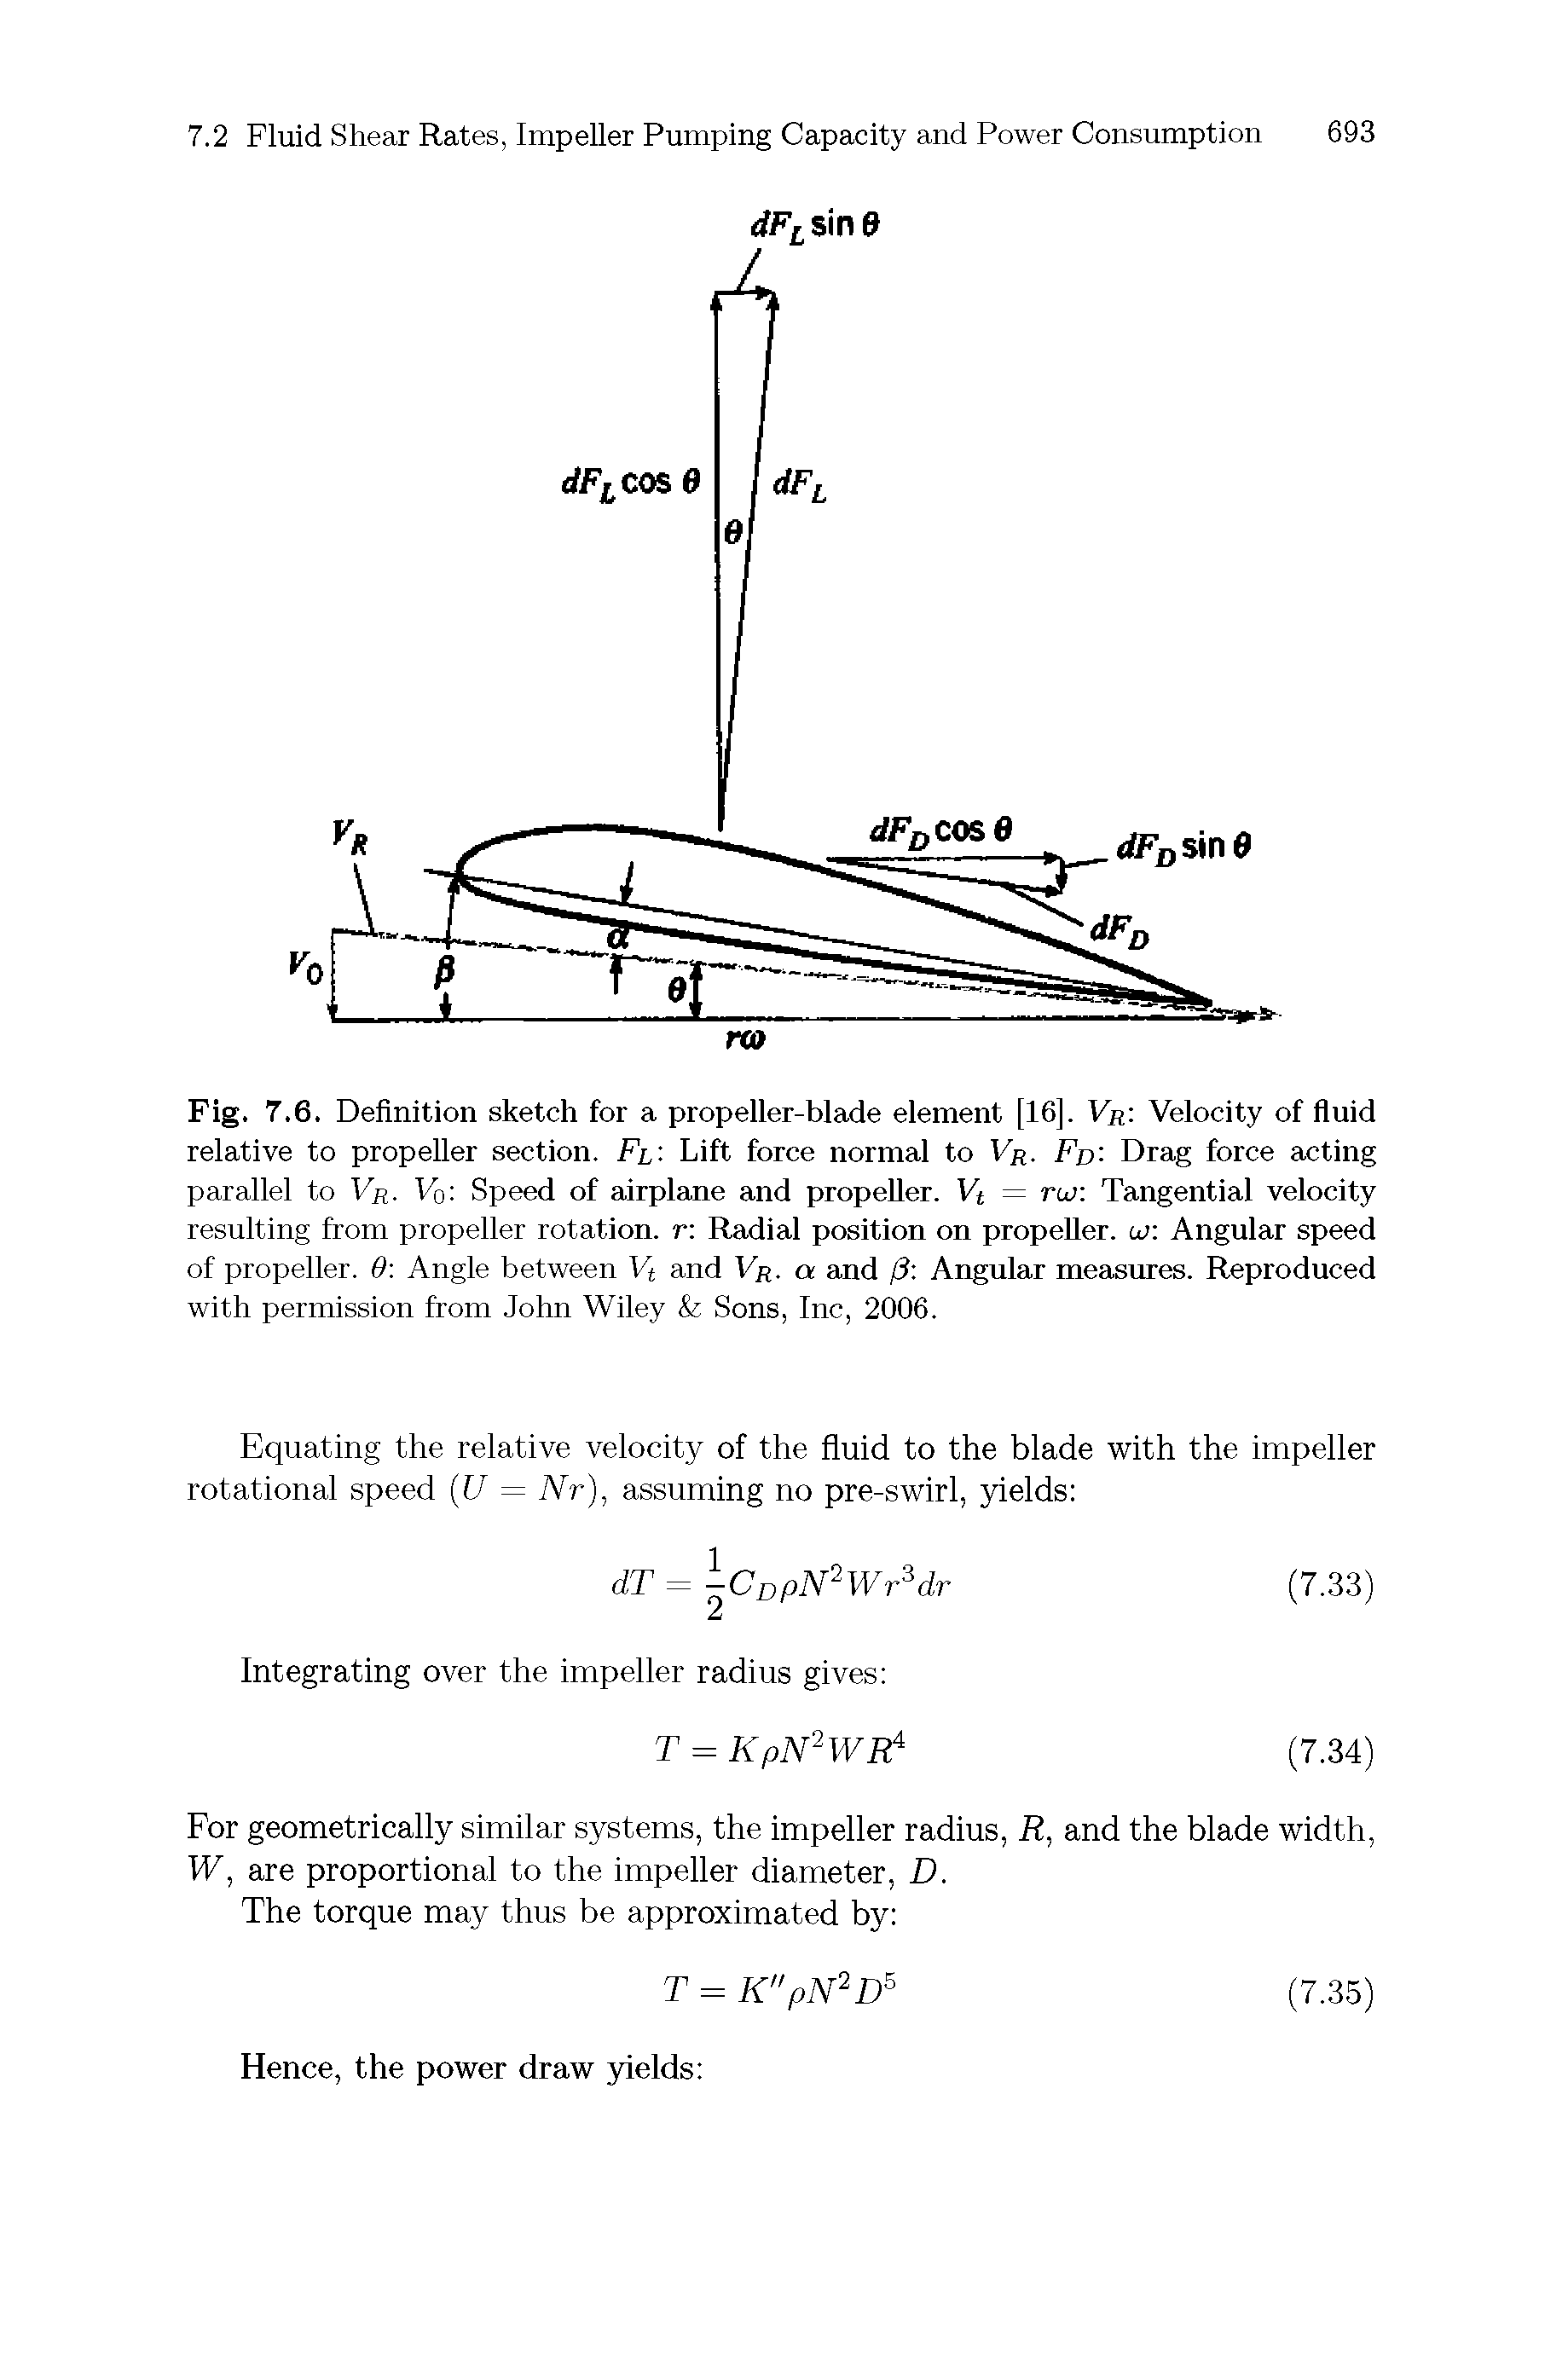 Fig. 7.6. Definition sketch for a propeiler-blade eiement [16]. Vr Velocity of fluid relative to propeller section. Fl Lift force normai to Vr. Fd- Drag force acting parallel to Vr. Vq Speed of airplane and propeller. Vj = ruj Tangential velocity resulting from propeller rotation, r Radiai position on propeller, cu Angular speed of propeller. 9 Angle between Vt and Vr. a and fS Angnlar measnres. Reproduced with permission from John Wiley Sons, Inc, 2006.